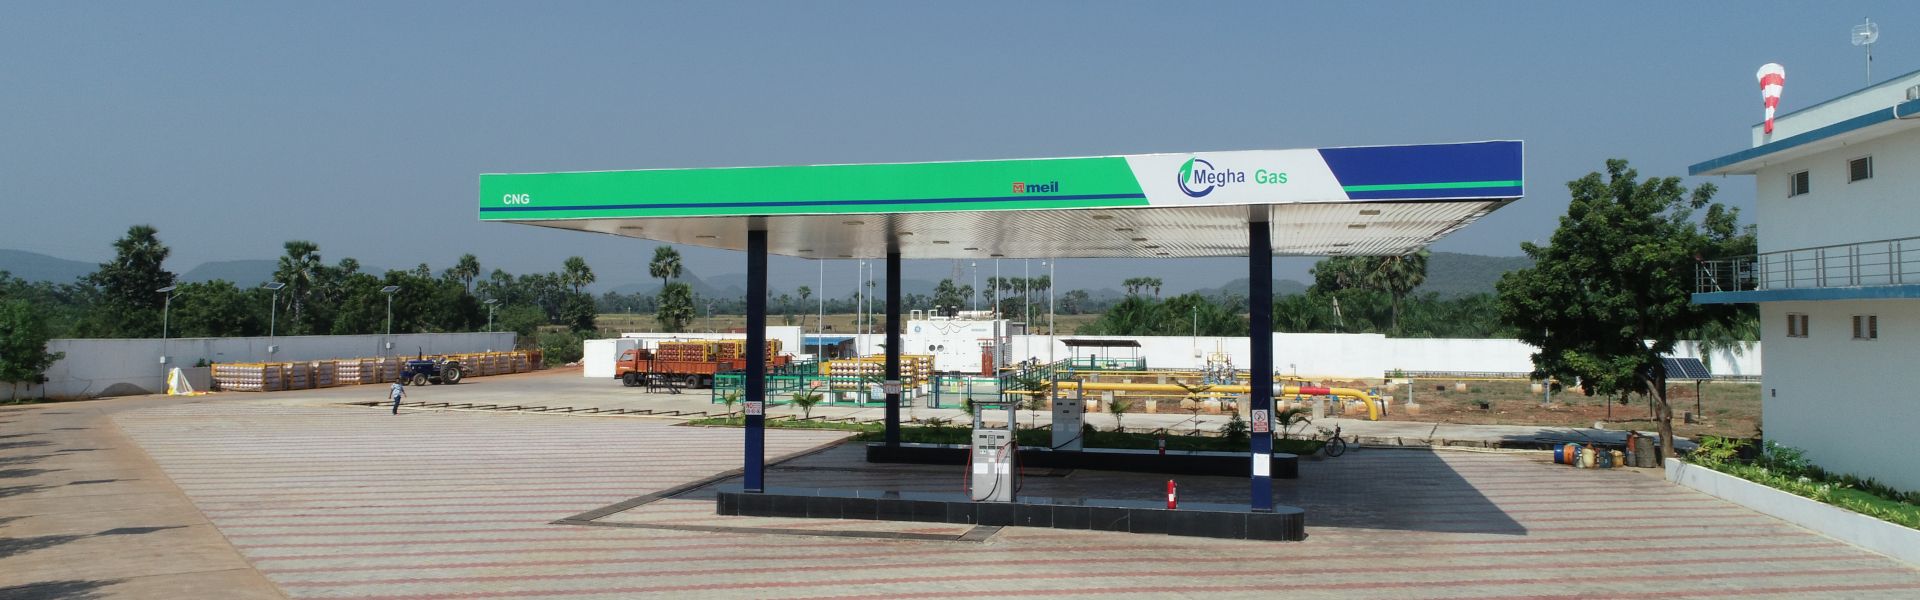 MeghaGas CNG services in india